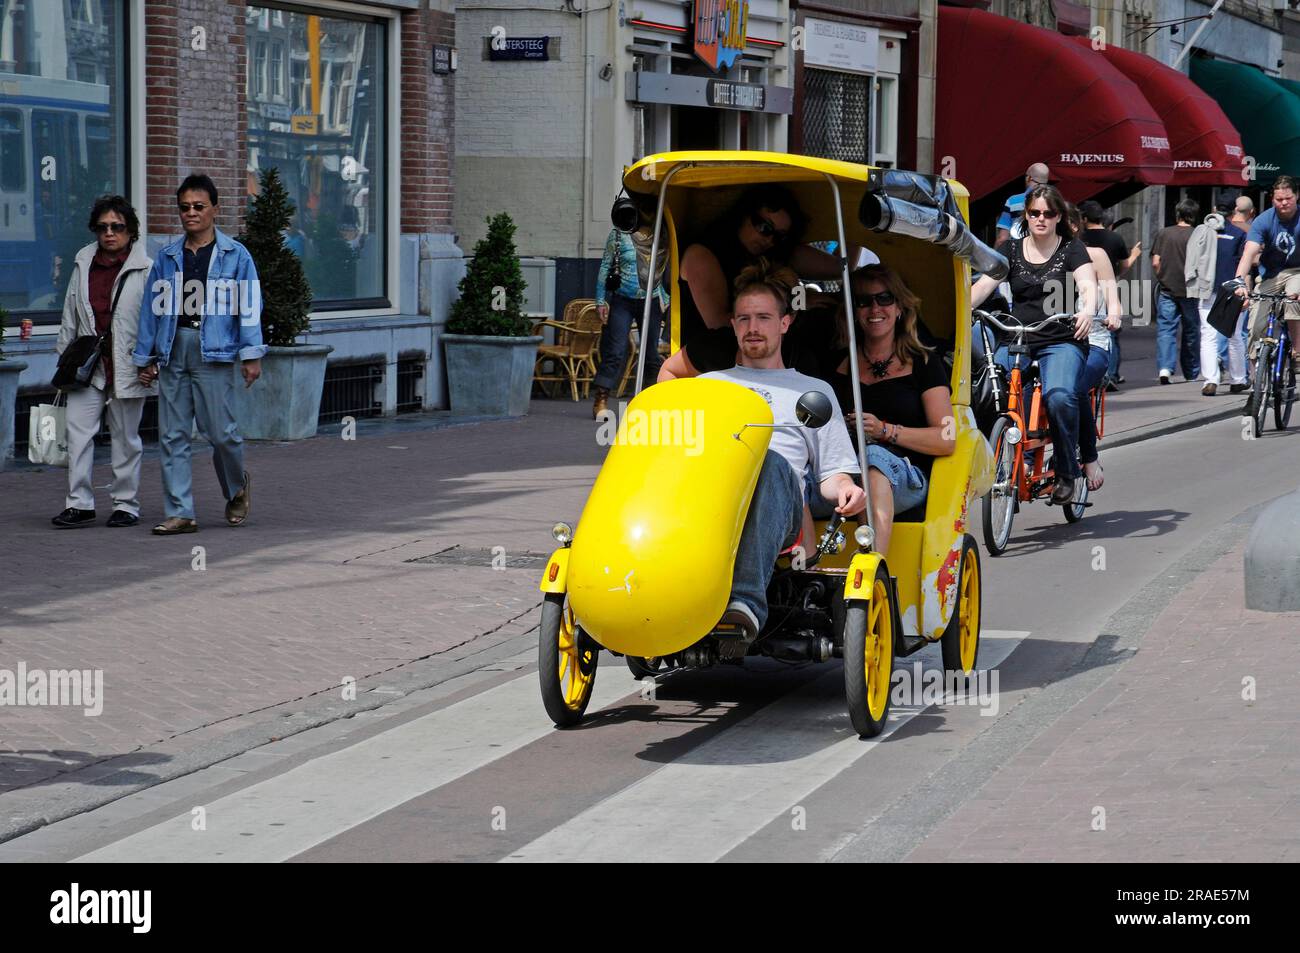 Bicycle taxi, Amsterdam Old Town, Netherlands Stock Photo